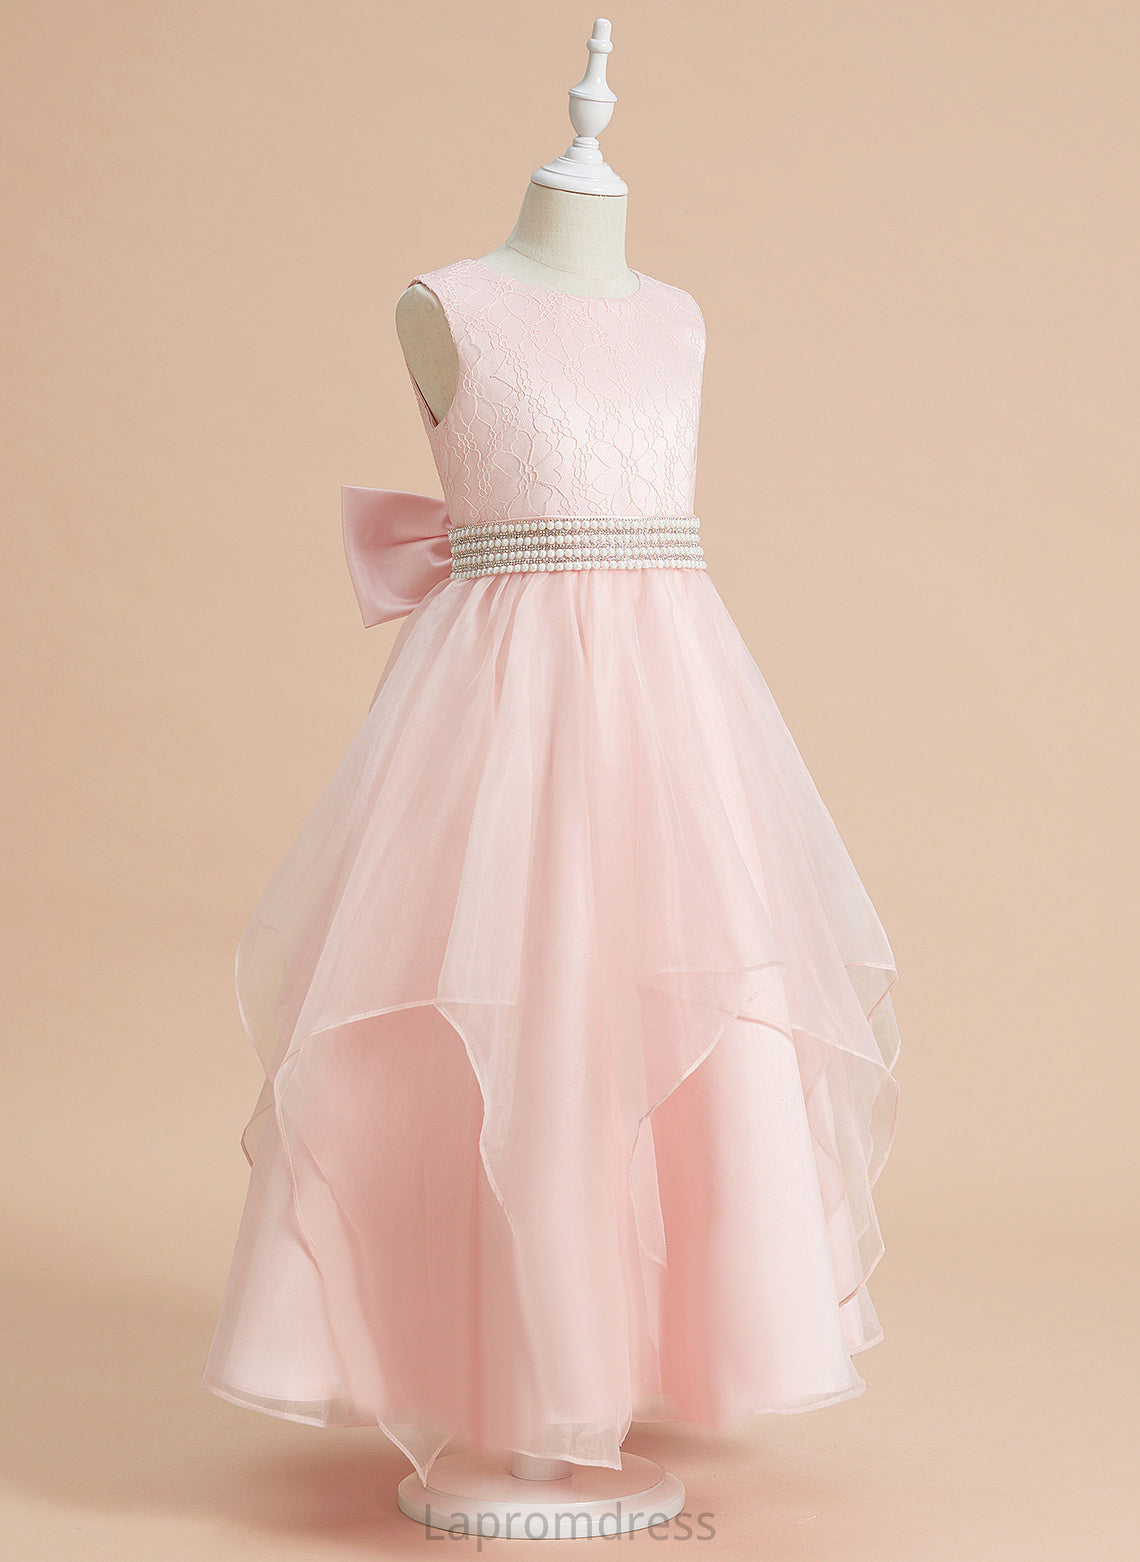 Beading/Bow(s) Neck Organza/Lace Flower Scoop Ankle-length Gina Sleeveless - Flower Girl Dresses Dress With Ball-Gown/Princess Girl